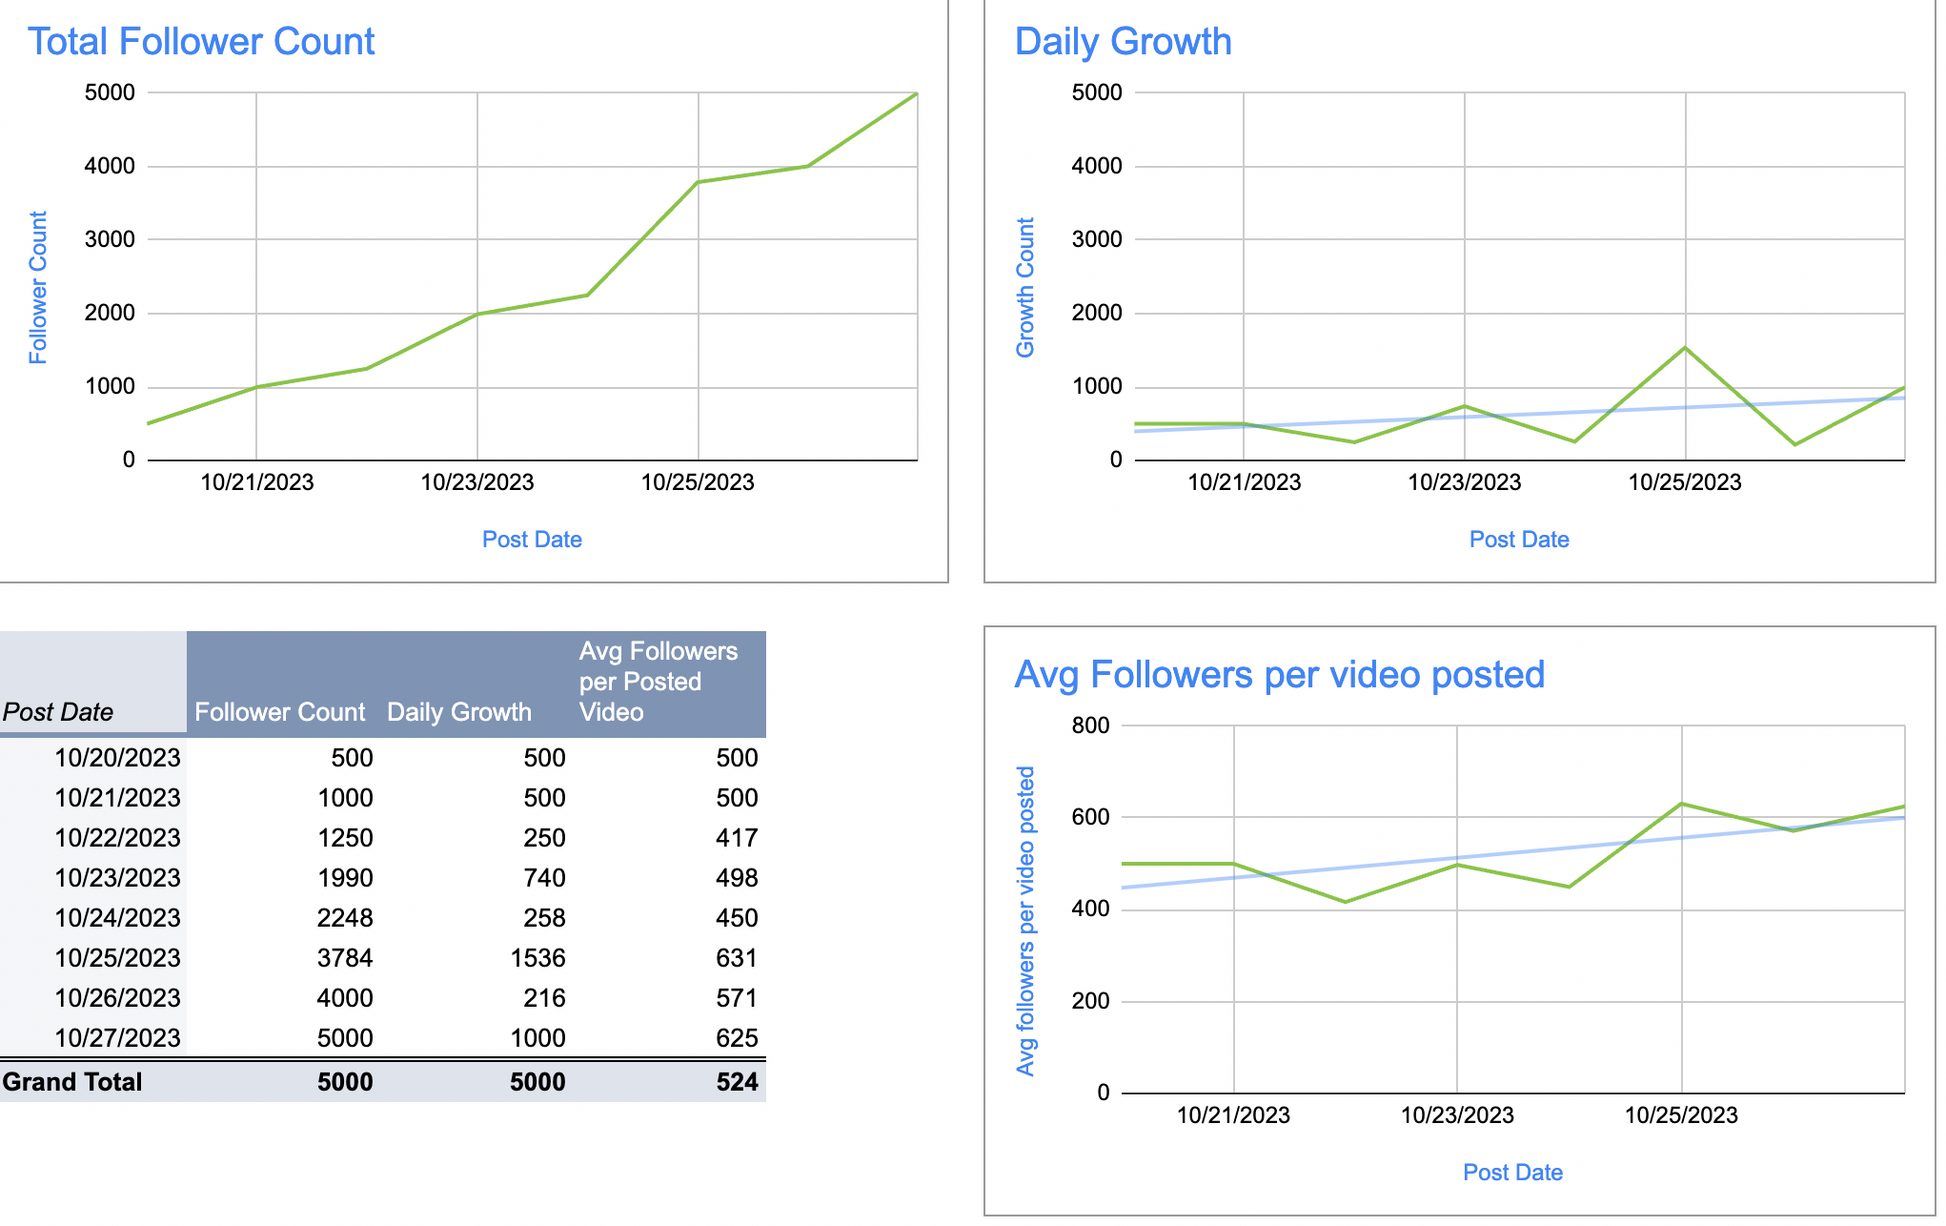 Visualization showing 3 charts for "Total Follower Count", "Daily Growth", and "Average Followers per Video Posted" as well as a pivot table summarizing follower counts for each day